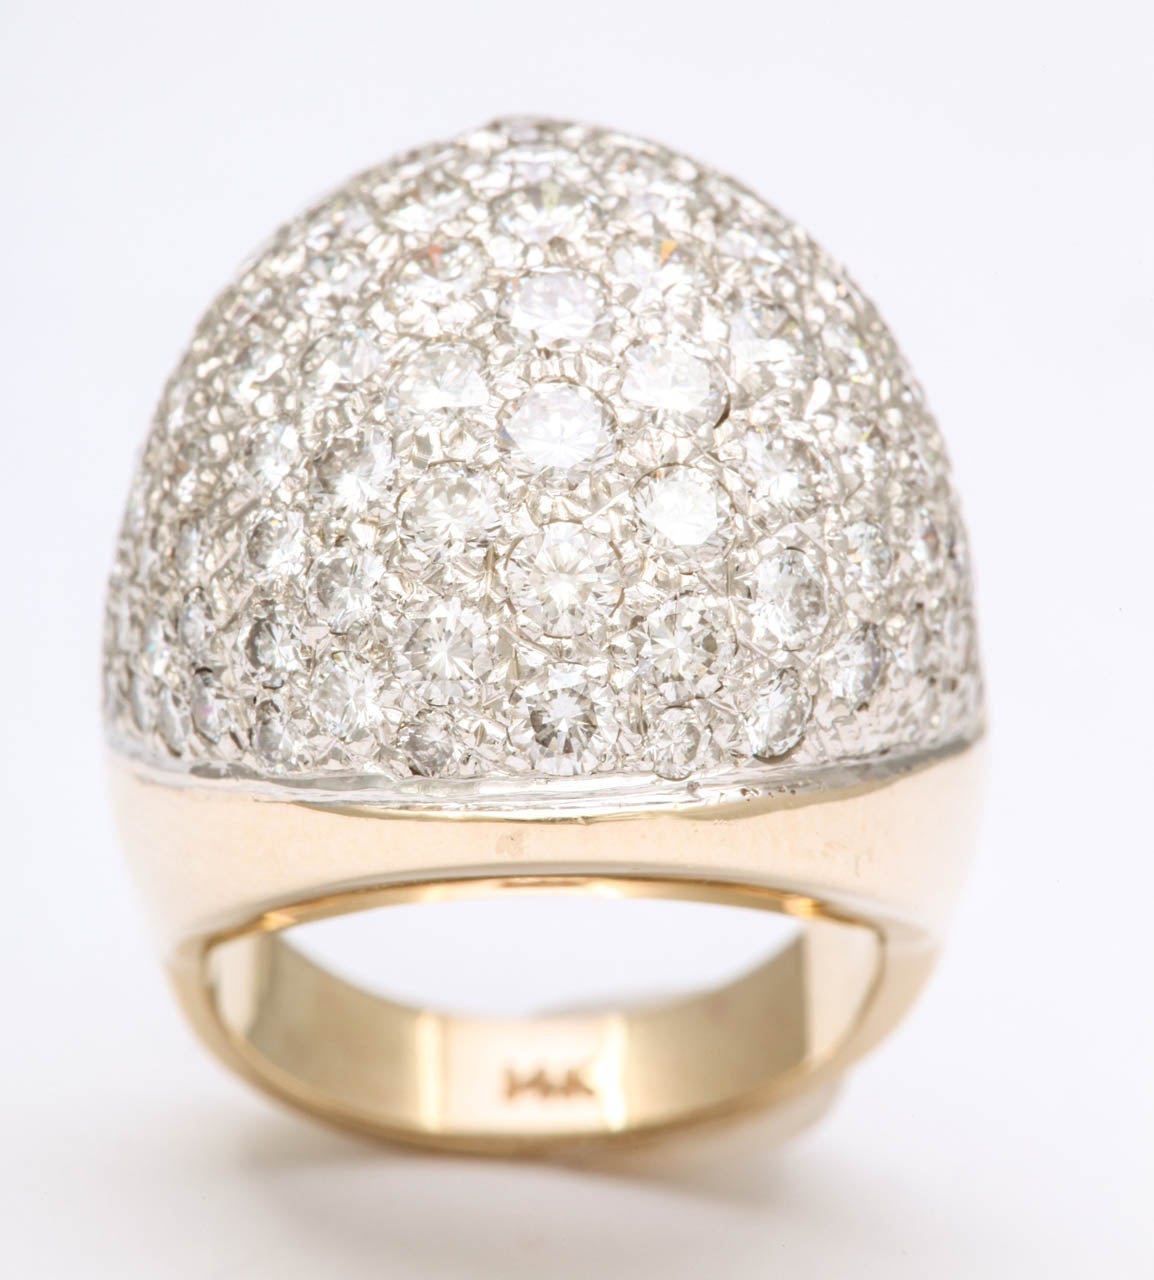 Not a simple Dome Ring but a Large Diamond Ring -  Pave set  with  Full cut - clean & white Diamonds .  Can be used as a pinky ring or 4th finger Dome Ring. 
 Almost 5cts.